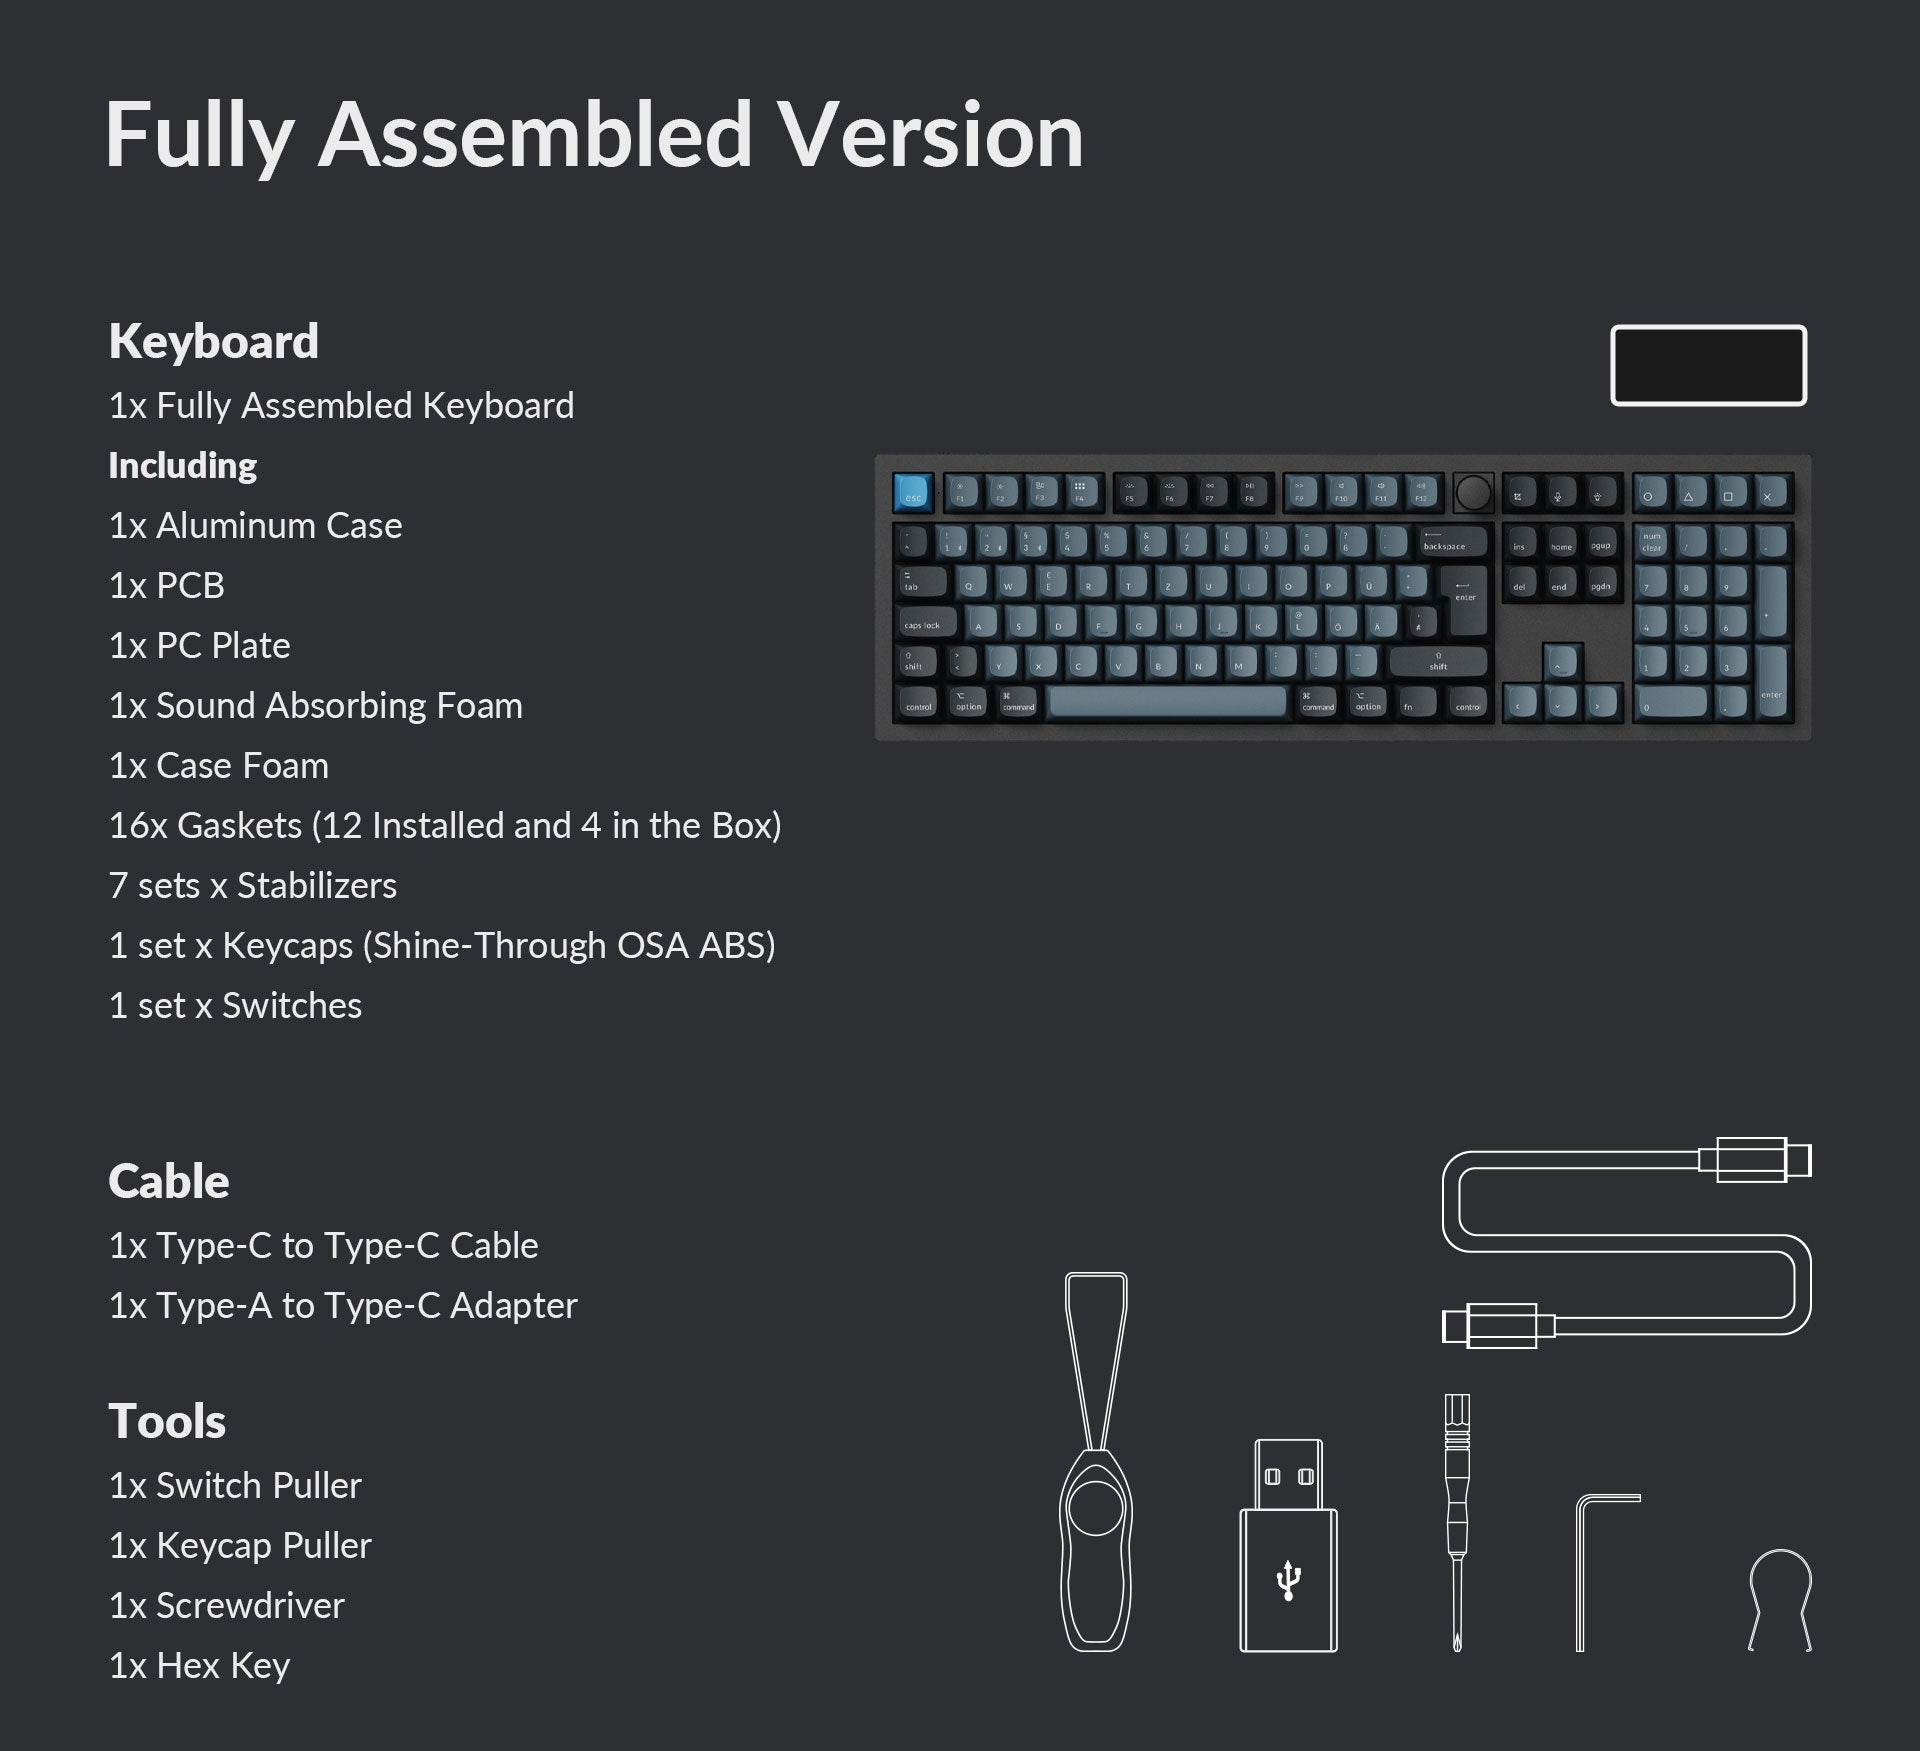 Packing list for Q6 Pro ISO fully assembled knob version